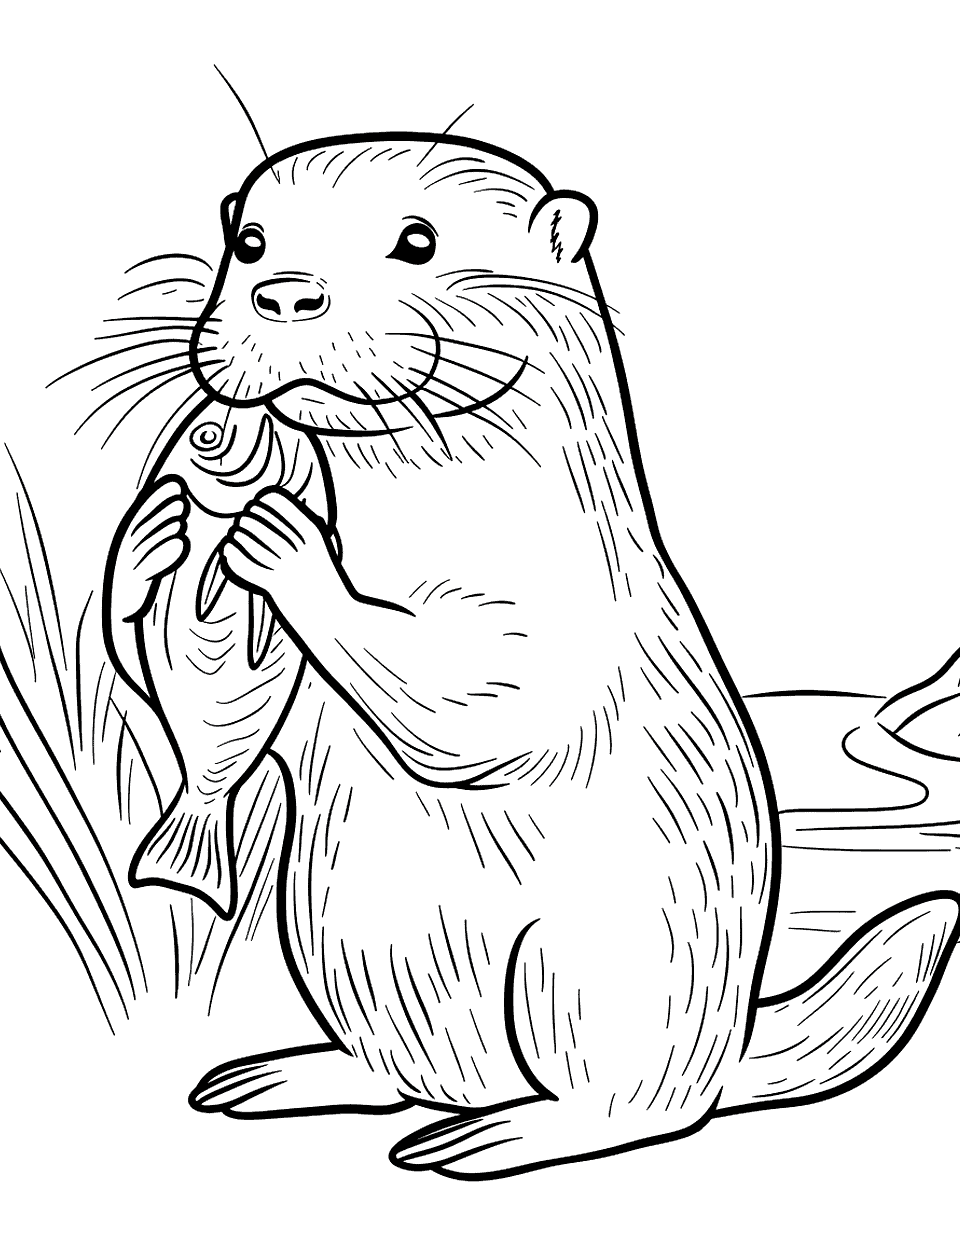 Otter Eating a Fish Coloring Page - An otter holding a fish in its paws, ready to take a bite.